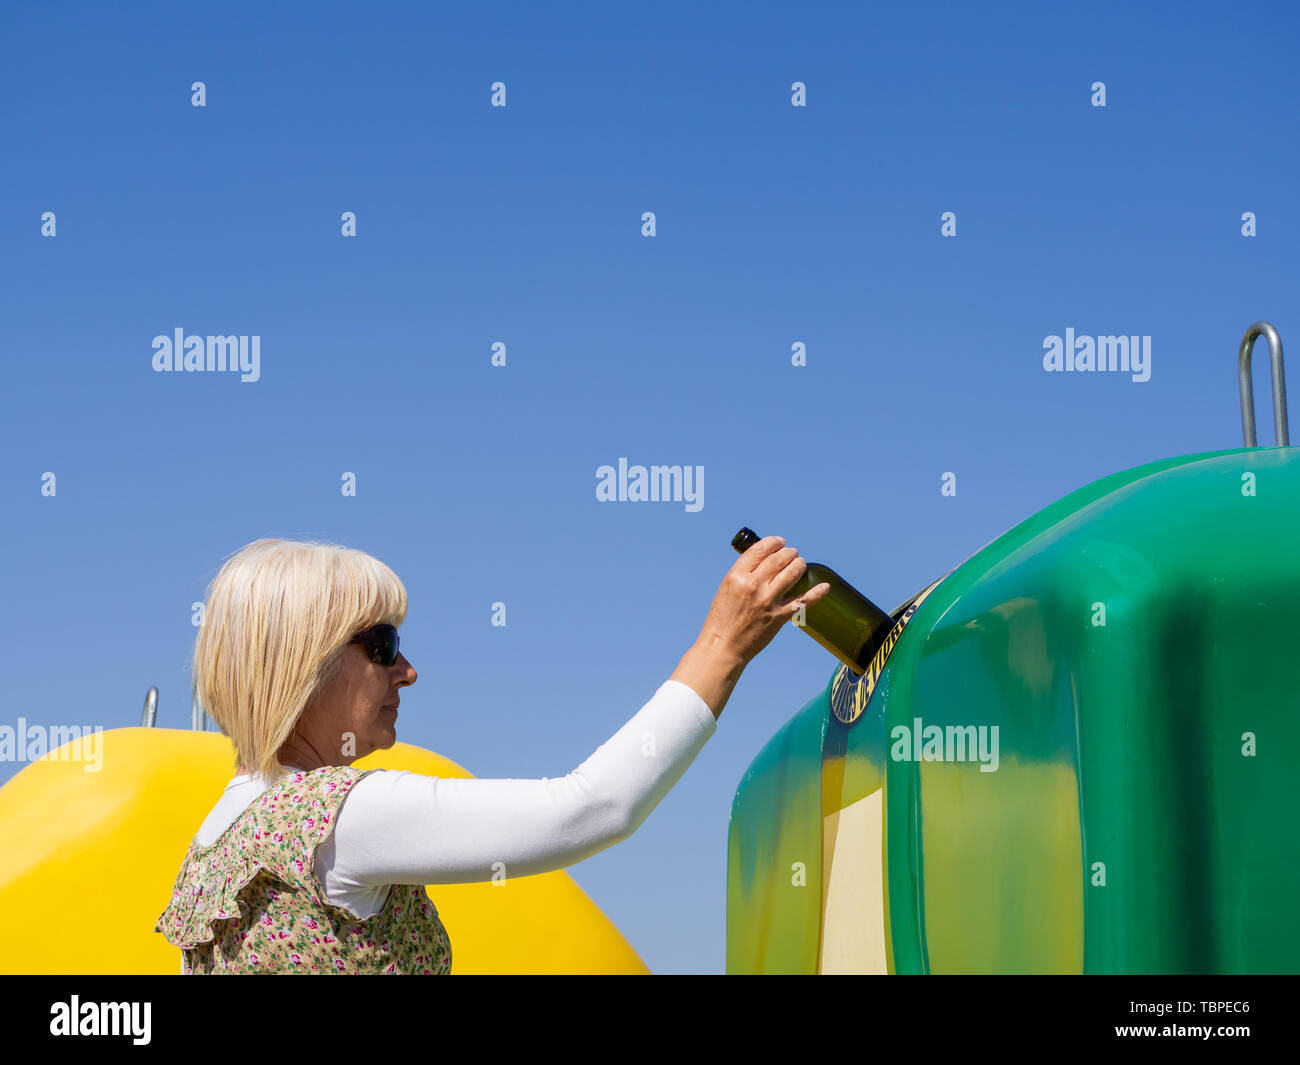 A mature woman pulling a crystal bottle in a green bin for recycling glass with the spanish text 'only glass containers' Stock Photo